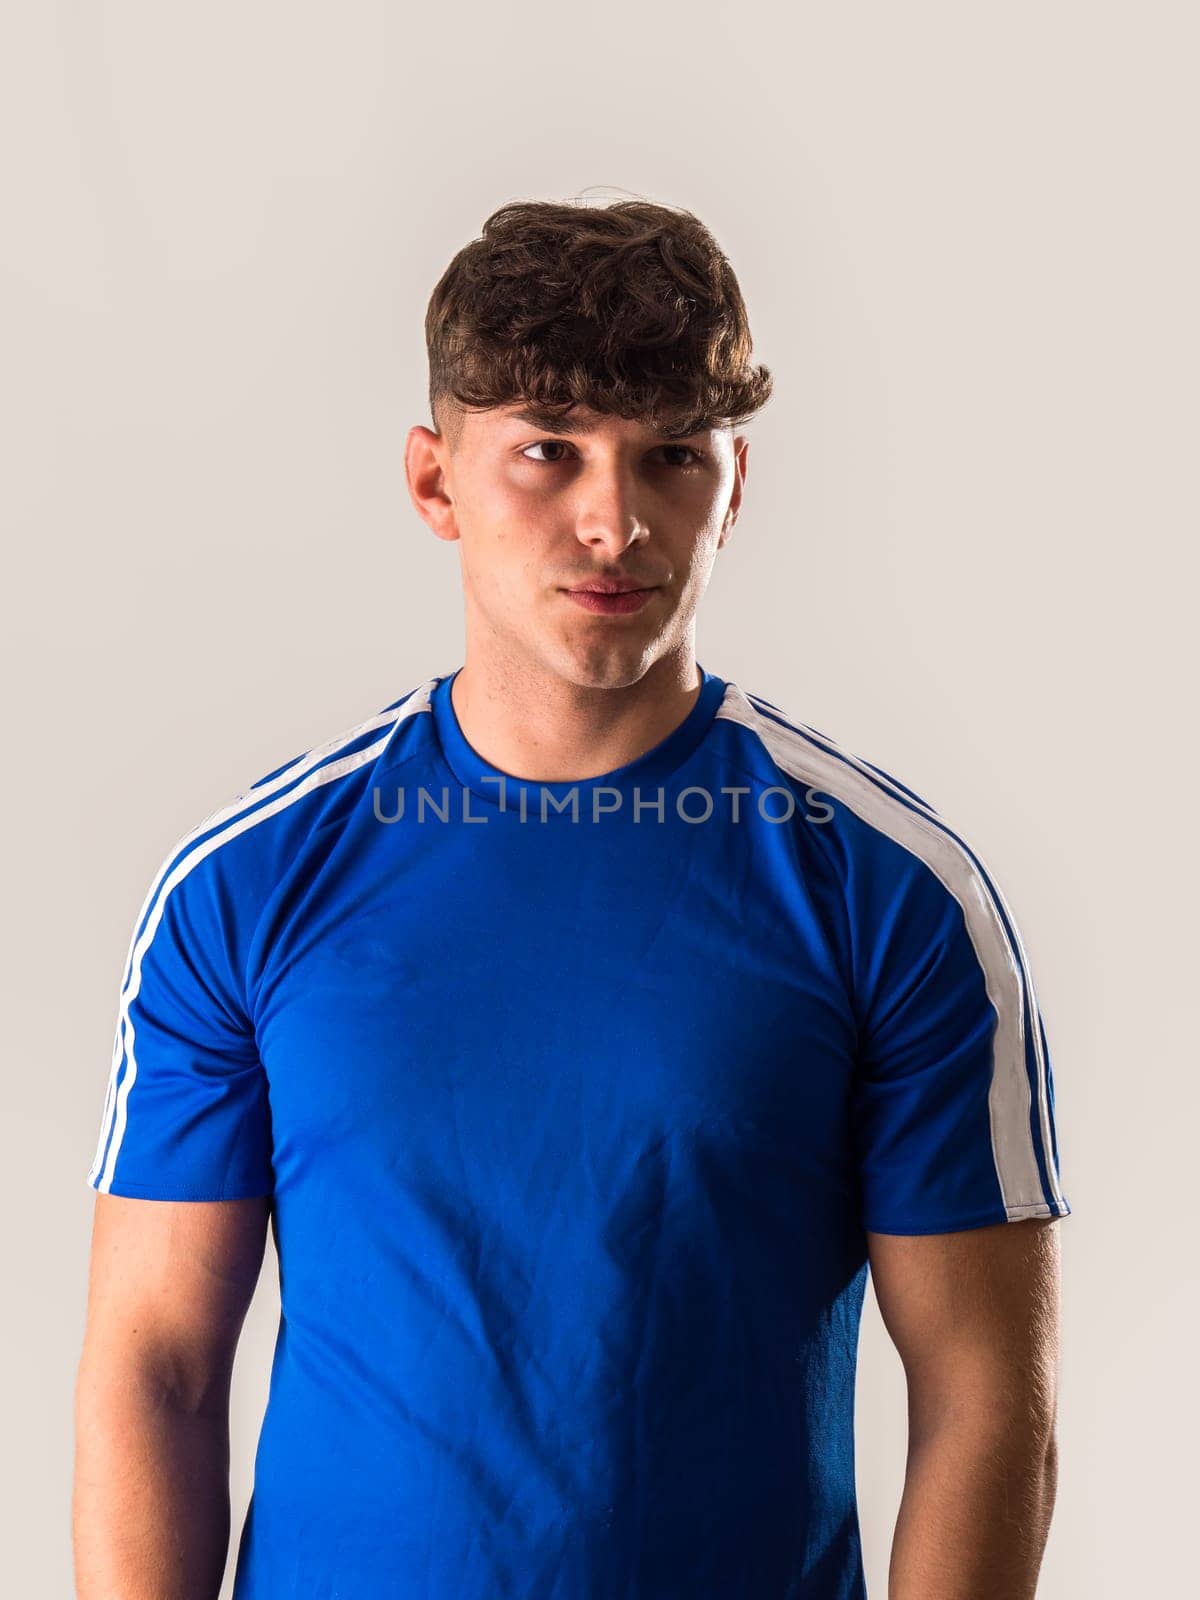 Posing with Confidence: A Stylish Young Man Captured in a Blue Soccer Shirt by artofphoto